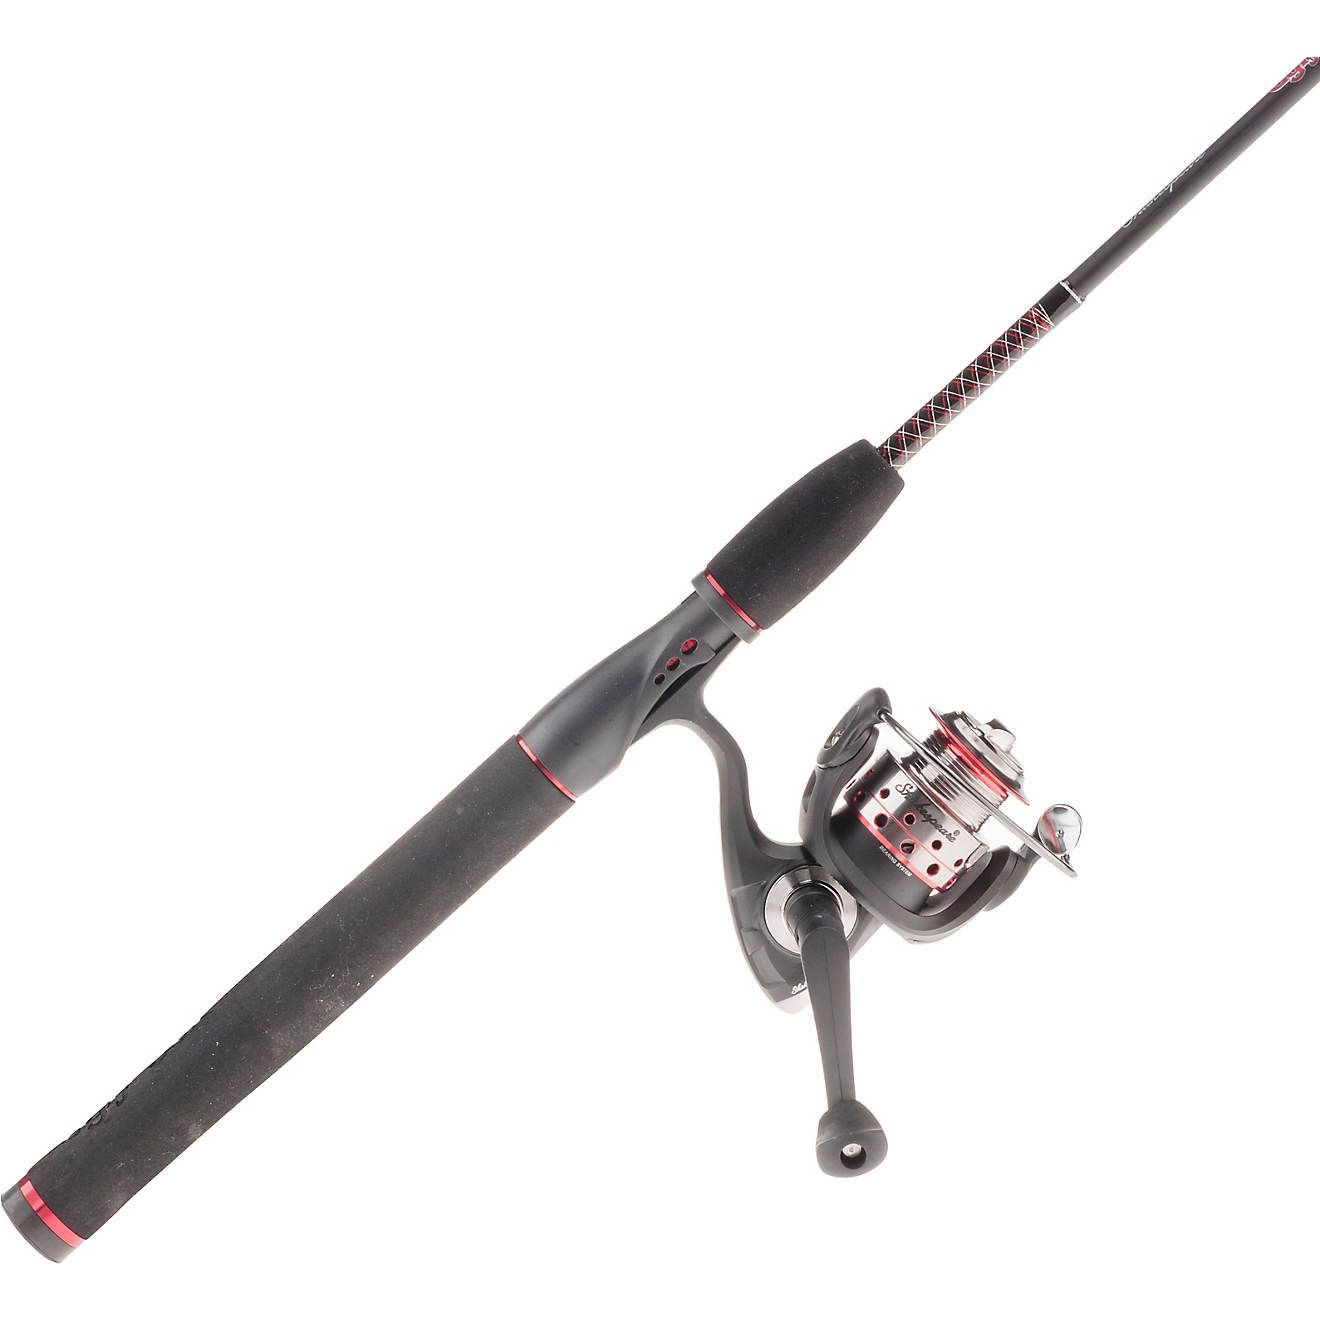 Shakespeare® Ugly Stik GX2 6' M Freshwater/Saltwater Spinning Rod and Reel Combo | Academy Sports + Outdoor Affiliate